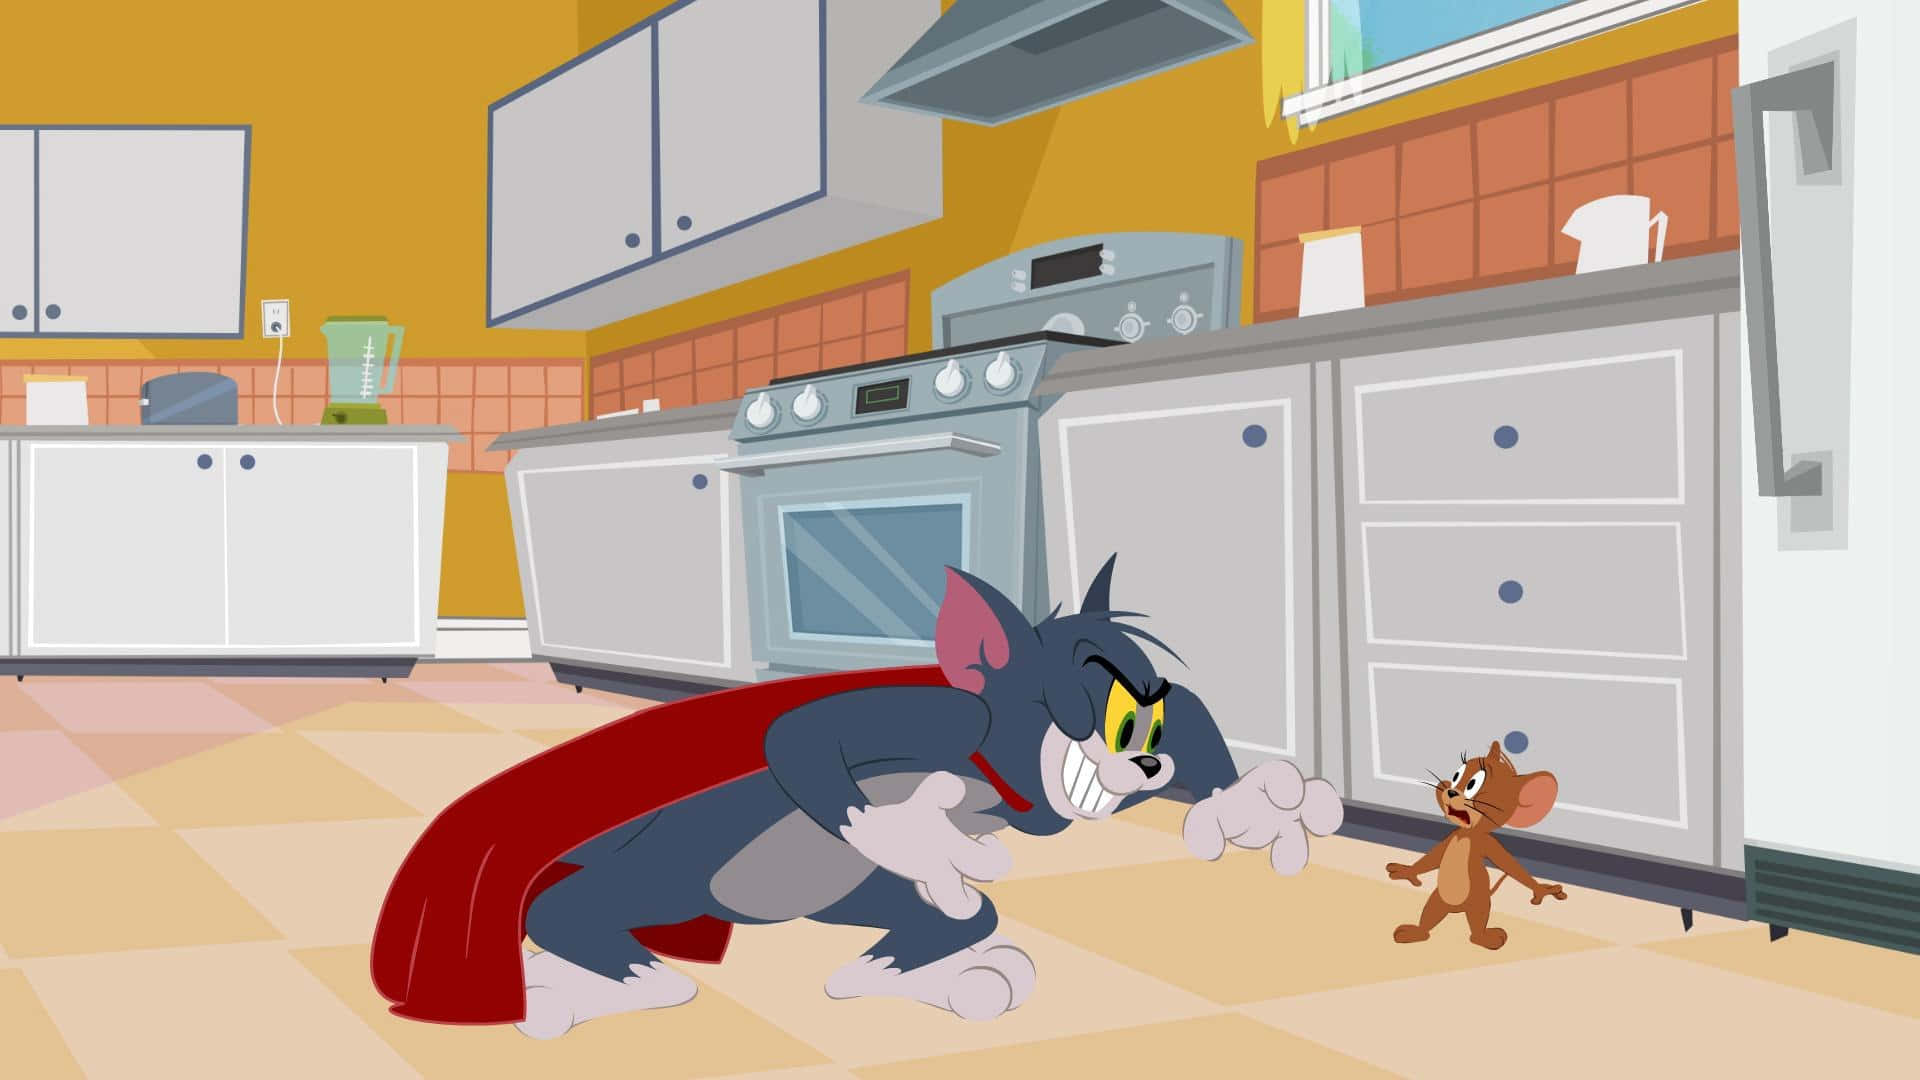 Tom and Jerry chase after each other in hilarious comedy